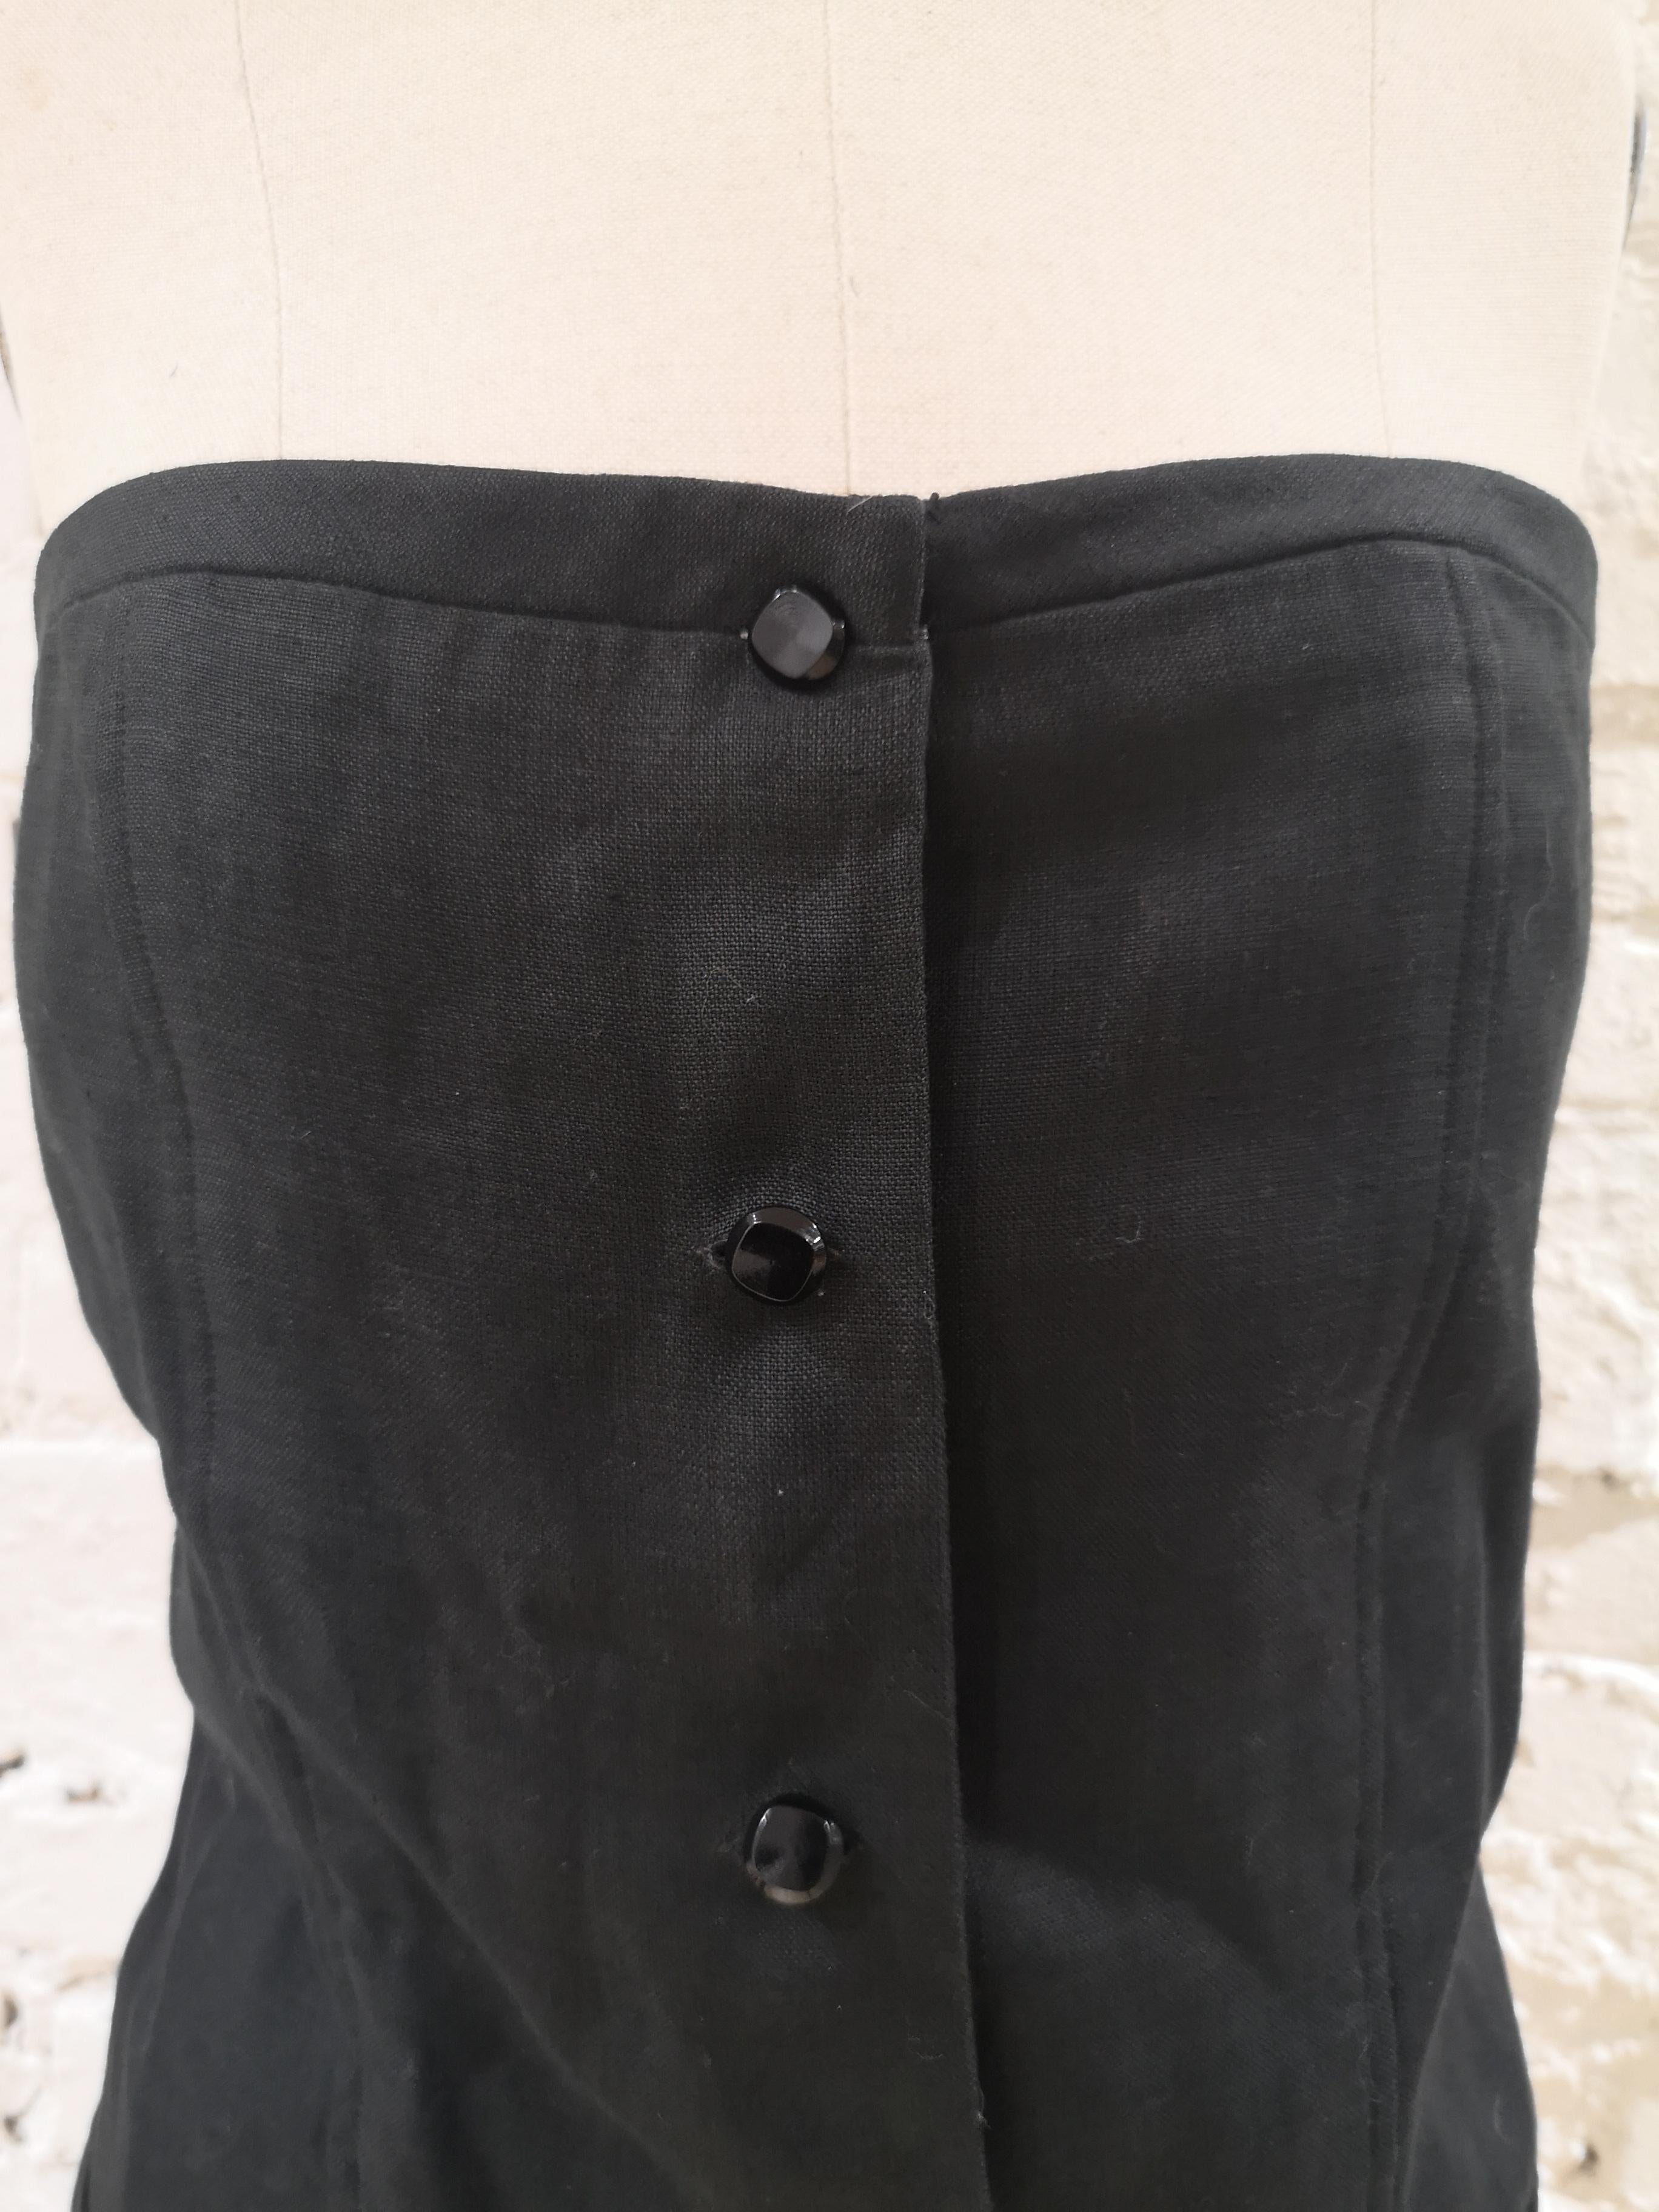 Valentino black corset 
totally made in italy in size 46